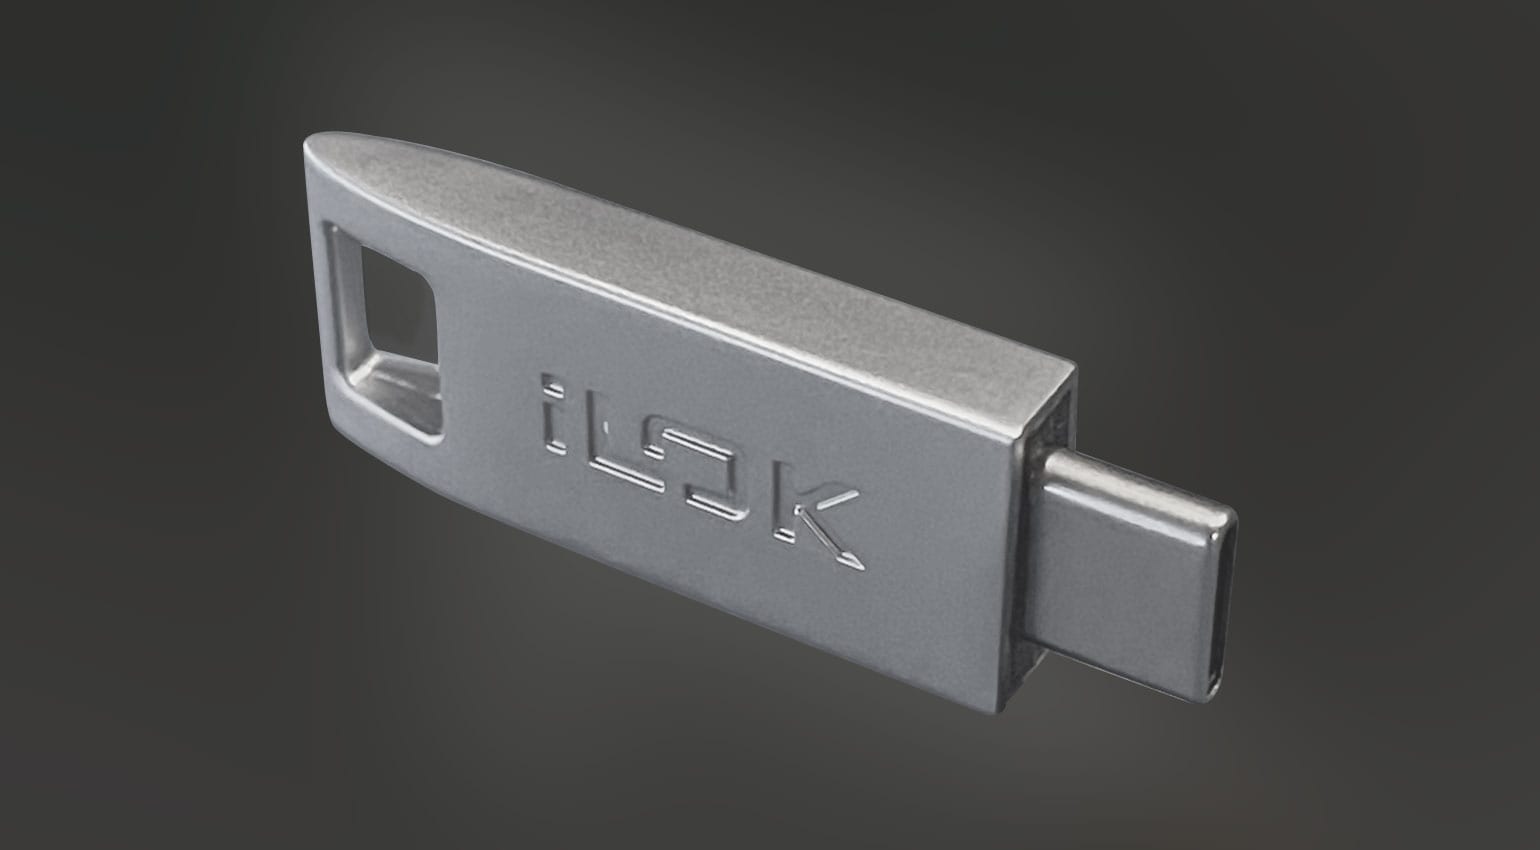 PACE iLok USB-C: Everyone's favorite dongle is keeping up with the 